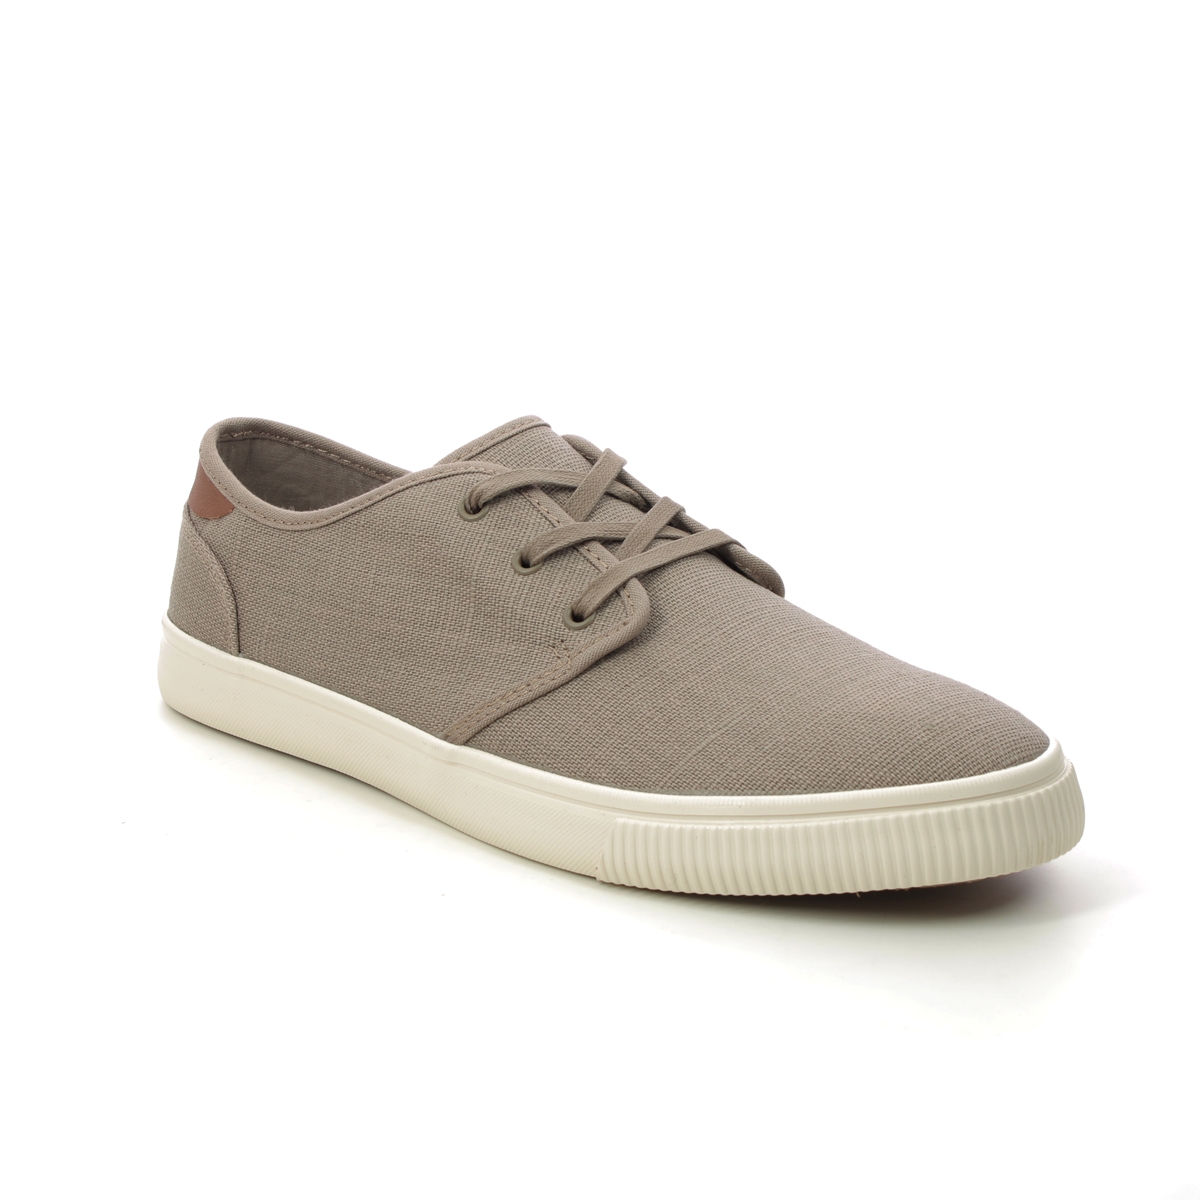 Toms Carlo Beige Mens trainers 10020842- in a Plain Canvas in Size 11